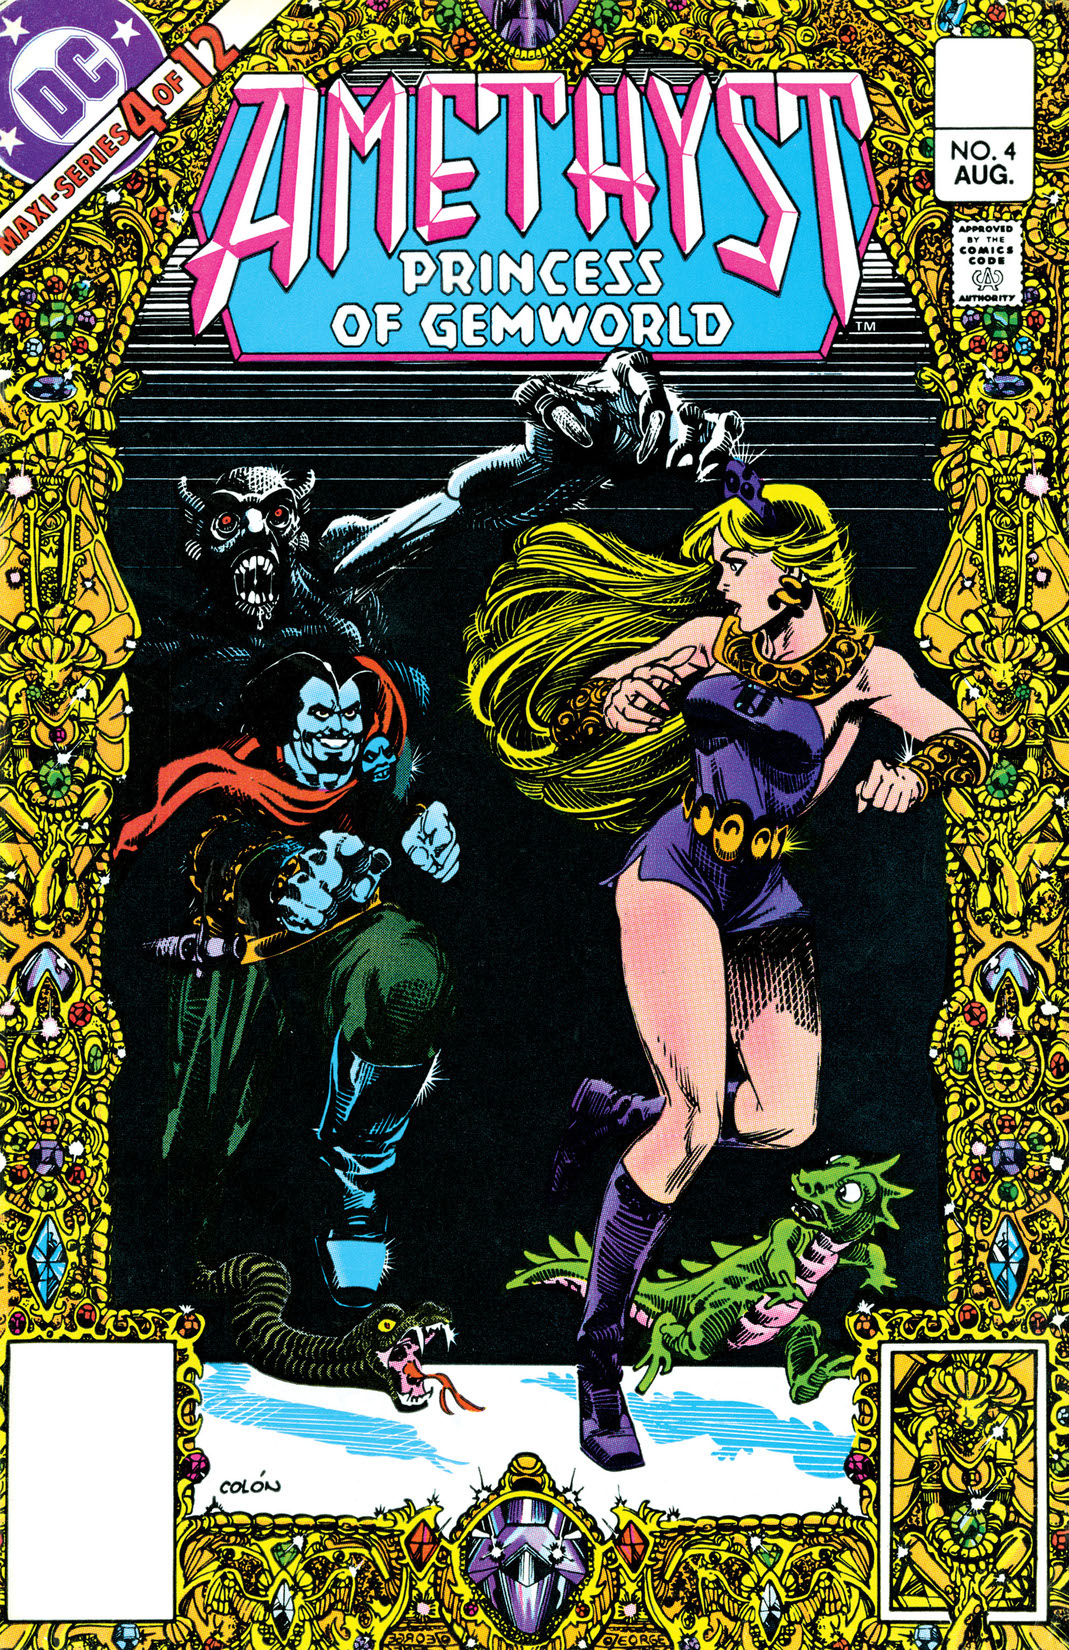 Amethyst: Princess of Gemworld (1983-) #4 preview images